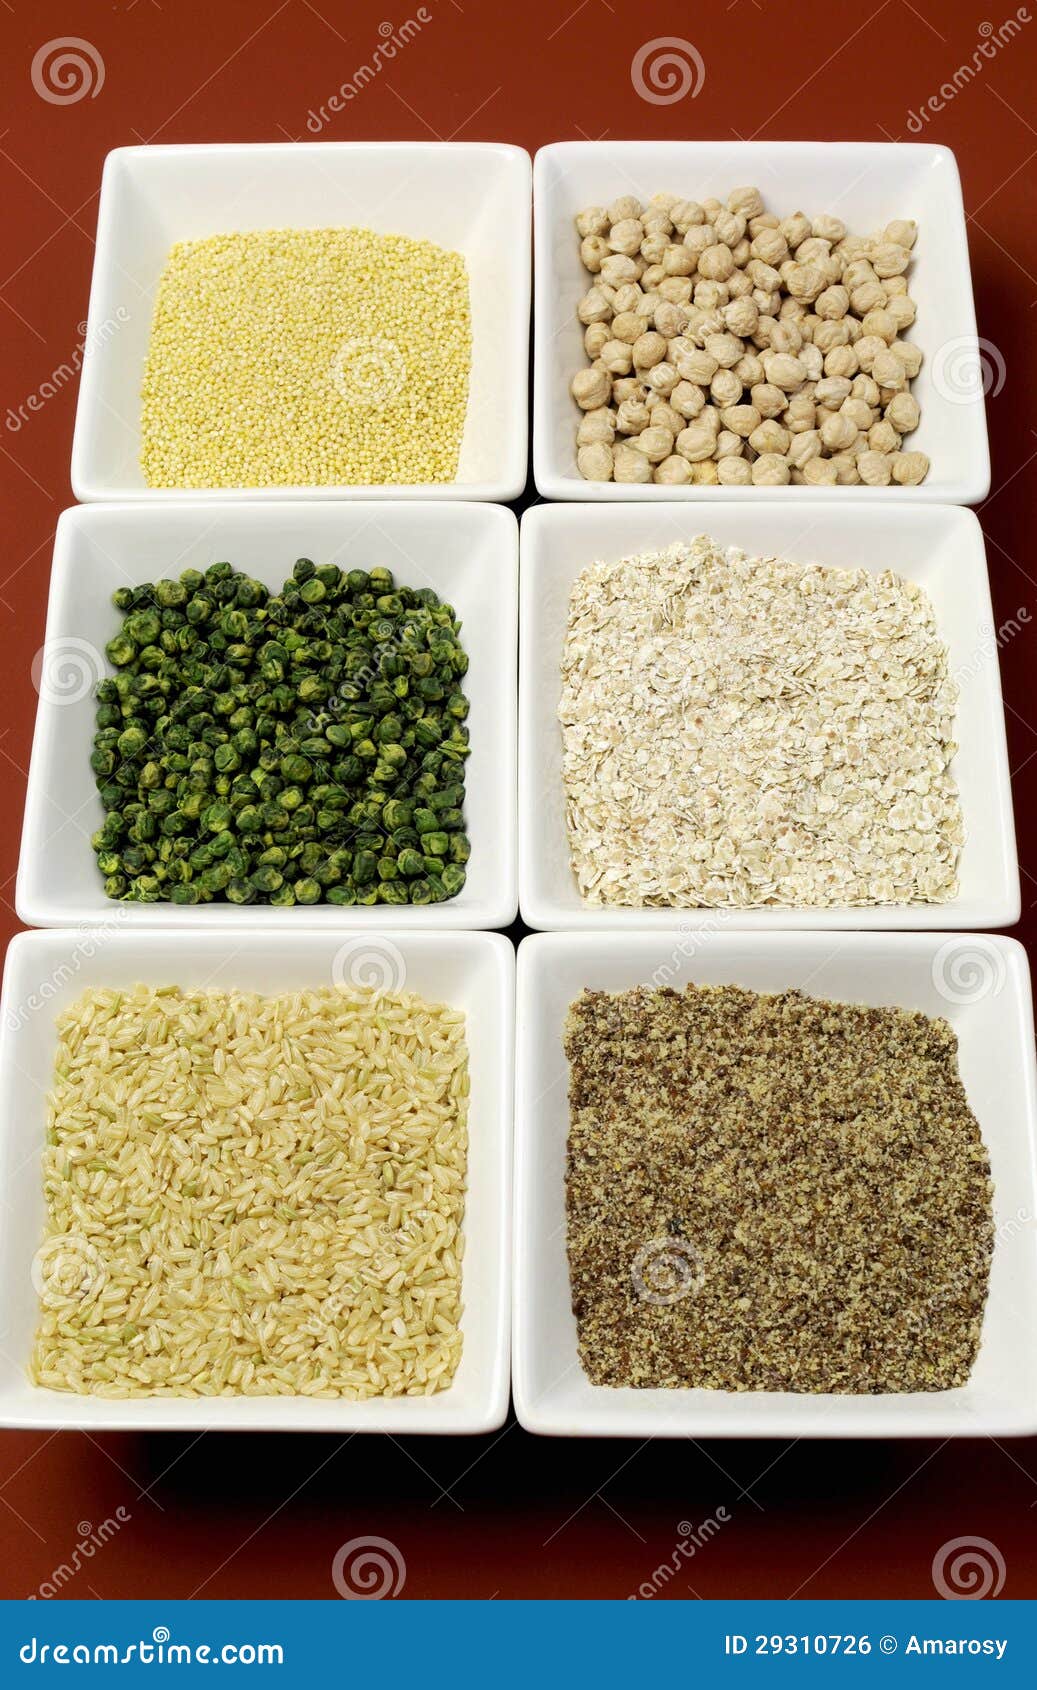 gluten free grains food - brown rice, millet, lsa, buckwheat flakes and chickpeas and green peas legumes - vertical